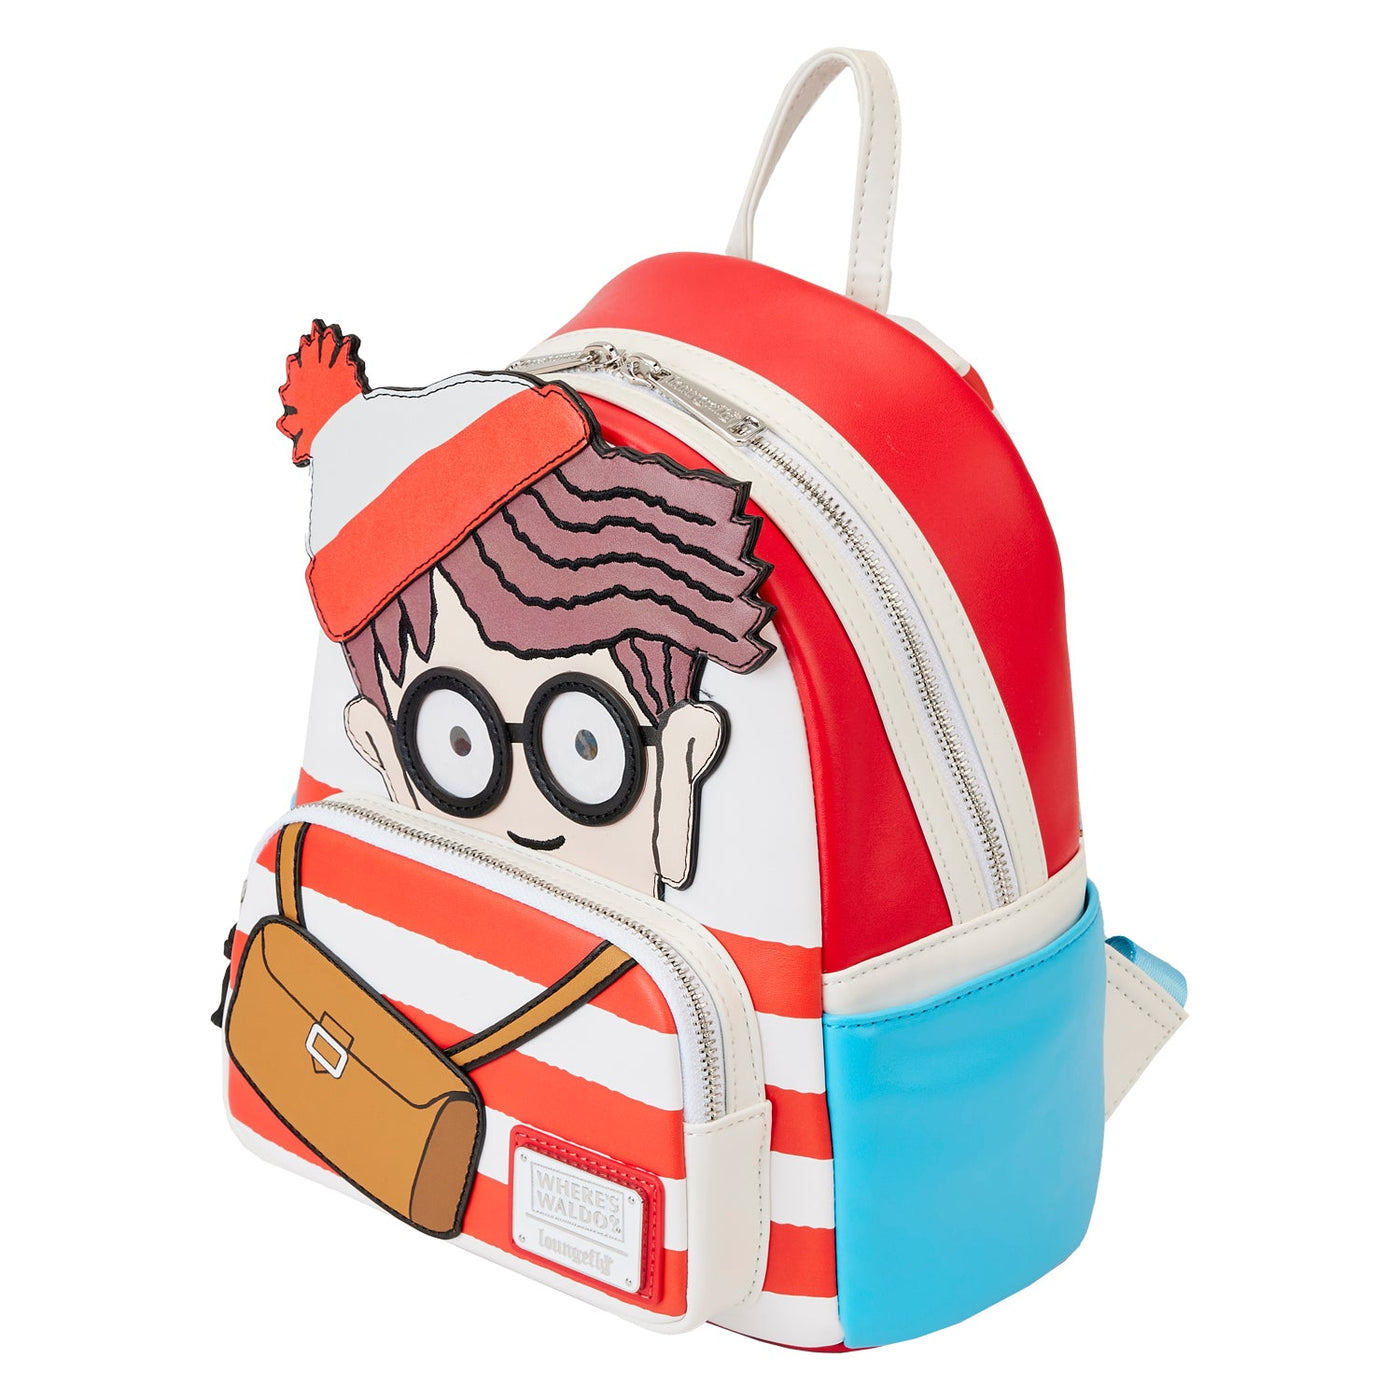 Loungefly Where's Waldo Cosplay Mini Backpack | Officially Licensed